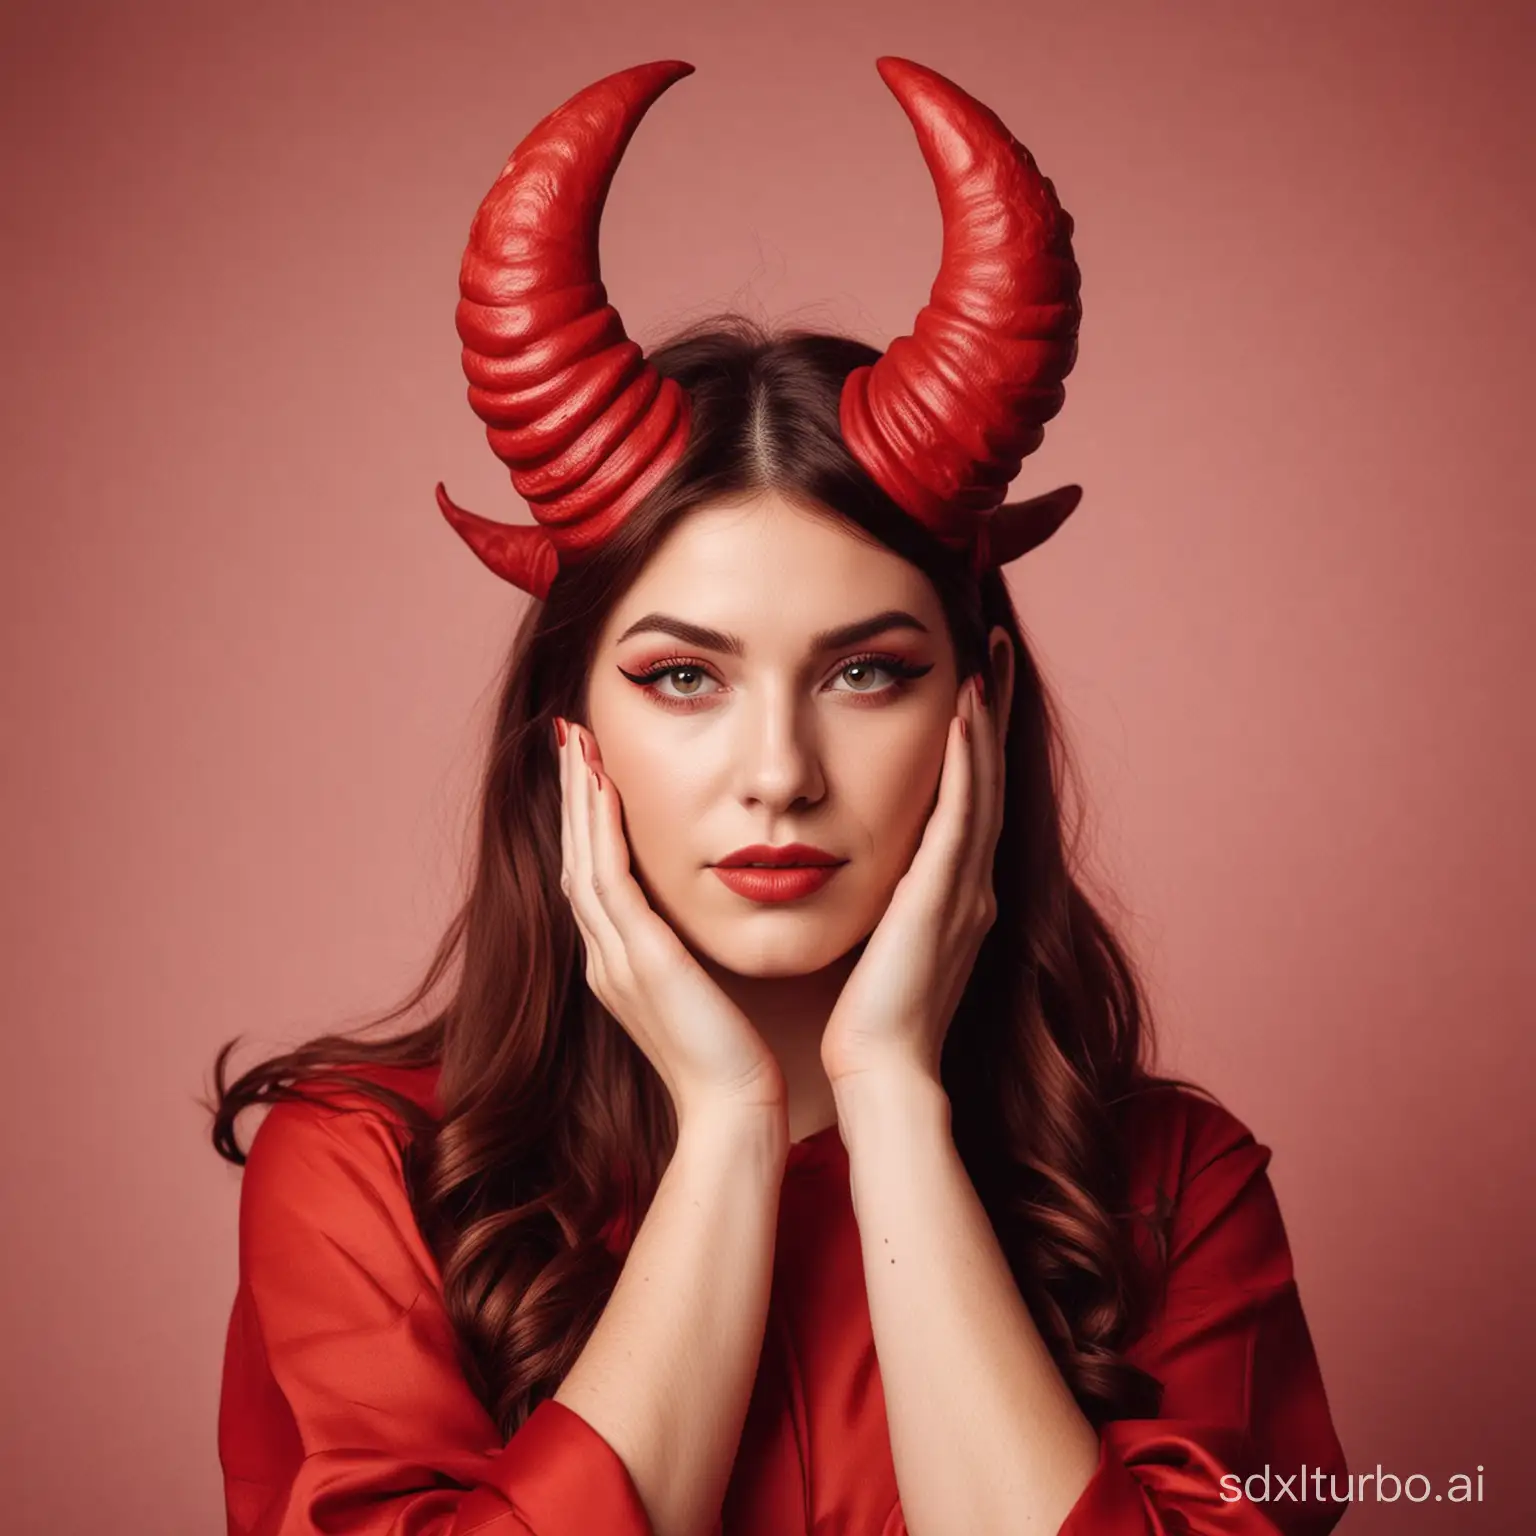 Take a photo of a woman who embodies the zodiac sign Taurus, with horns, in a red color scheme.